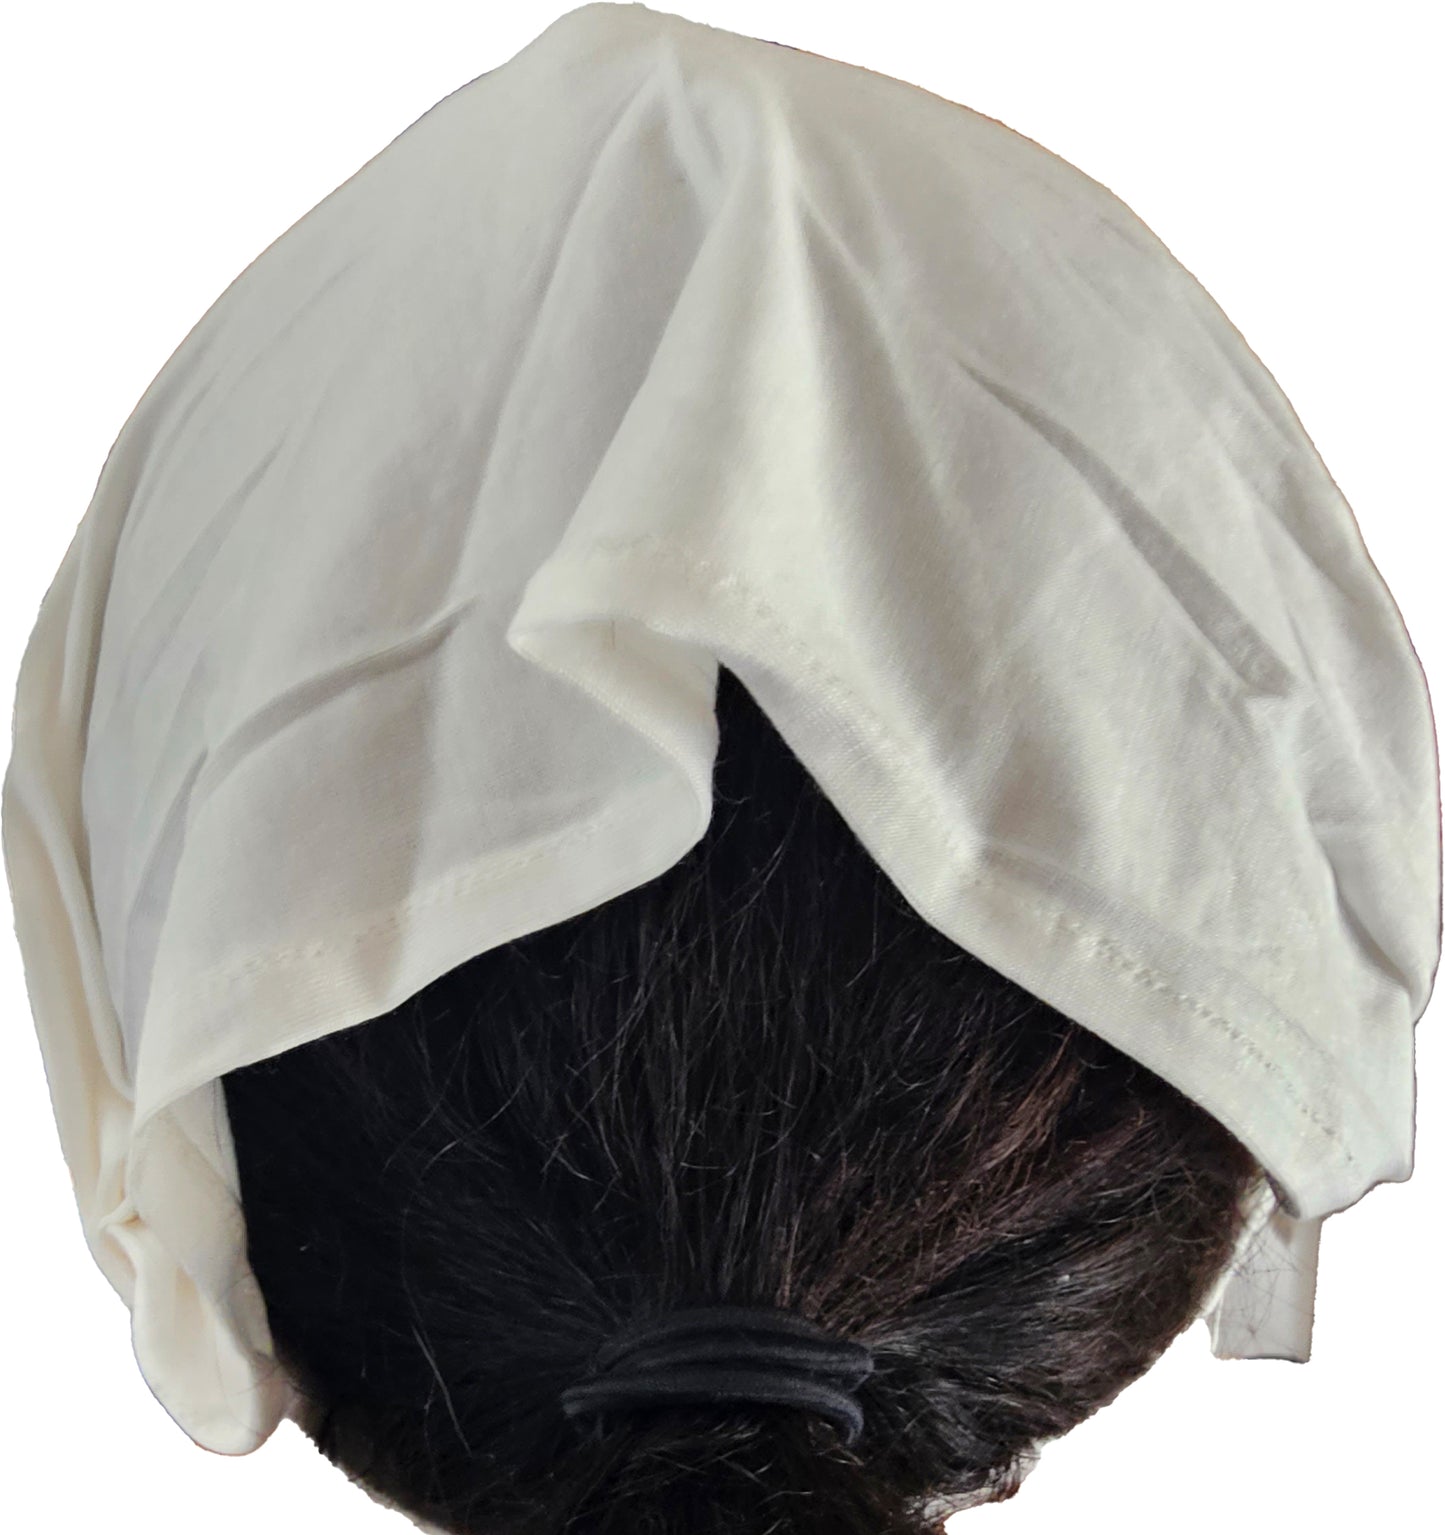 White Bamboo Headband the softest most breathable headband you have even worn - YOGAZ